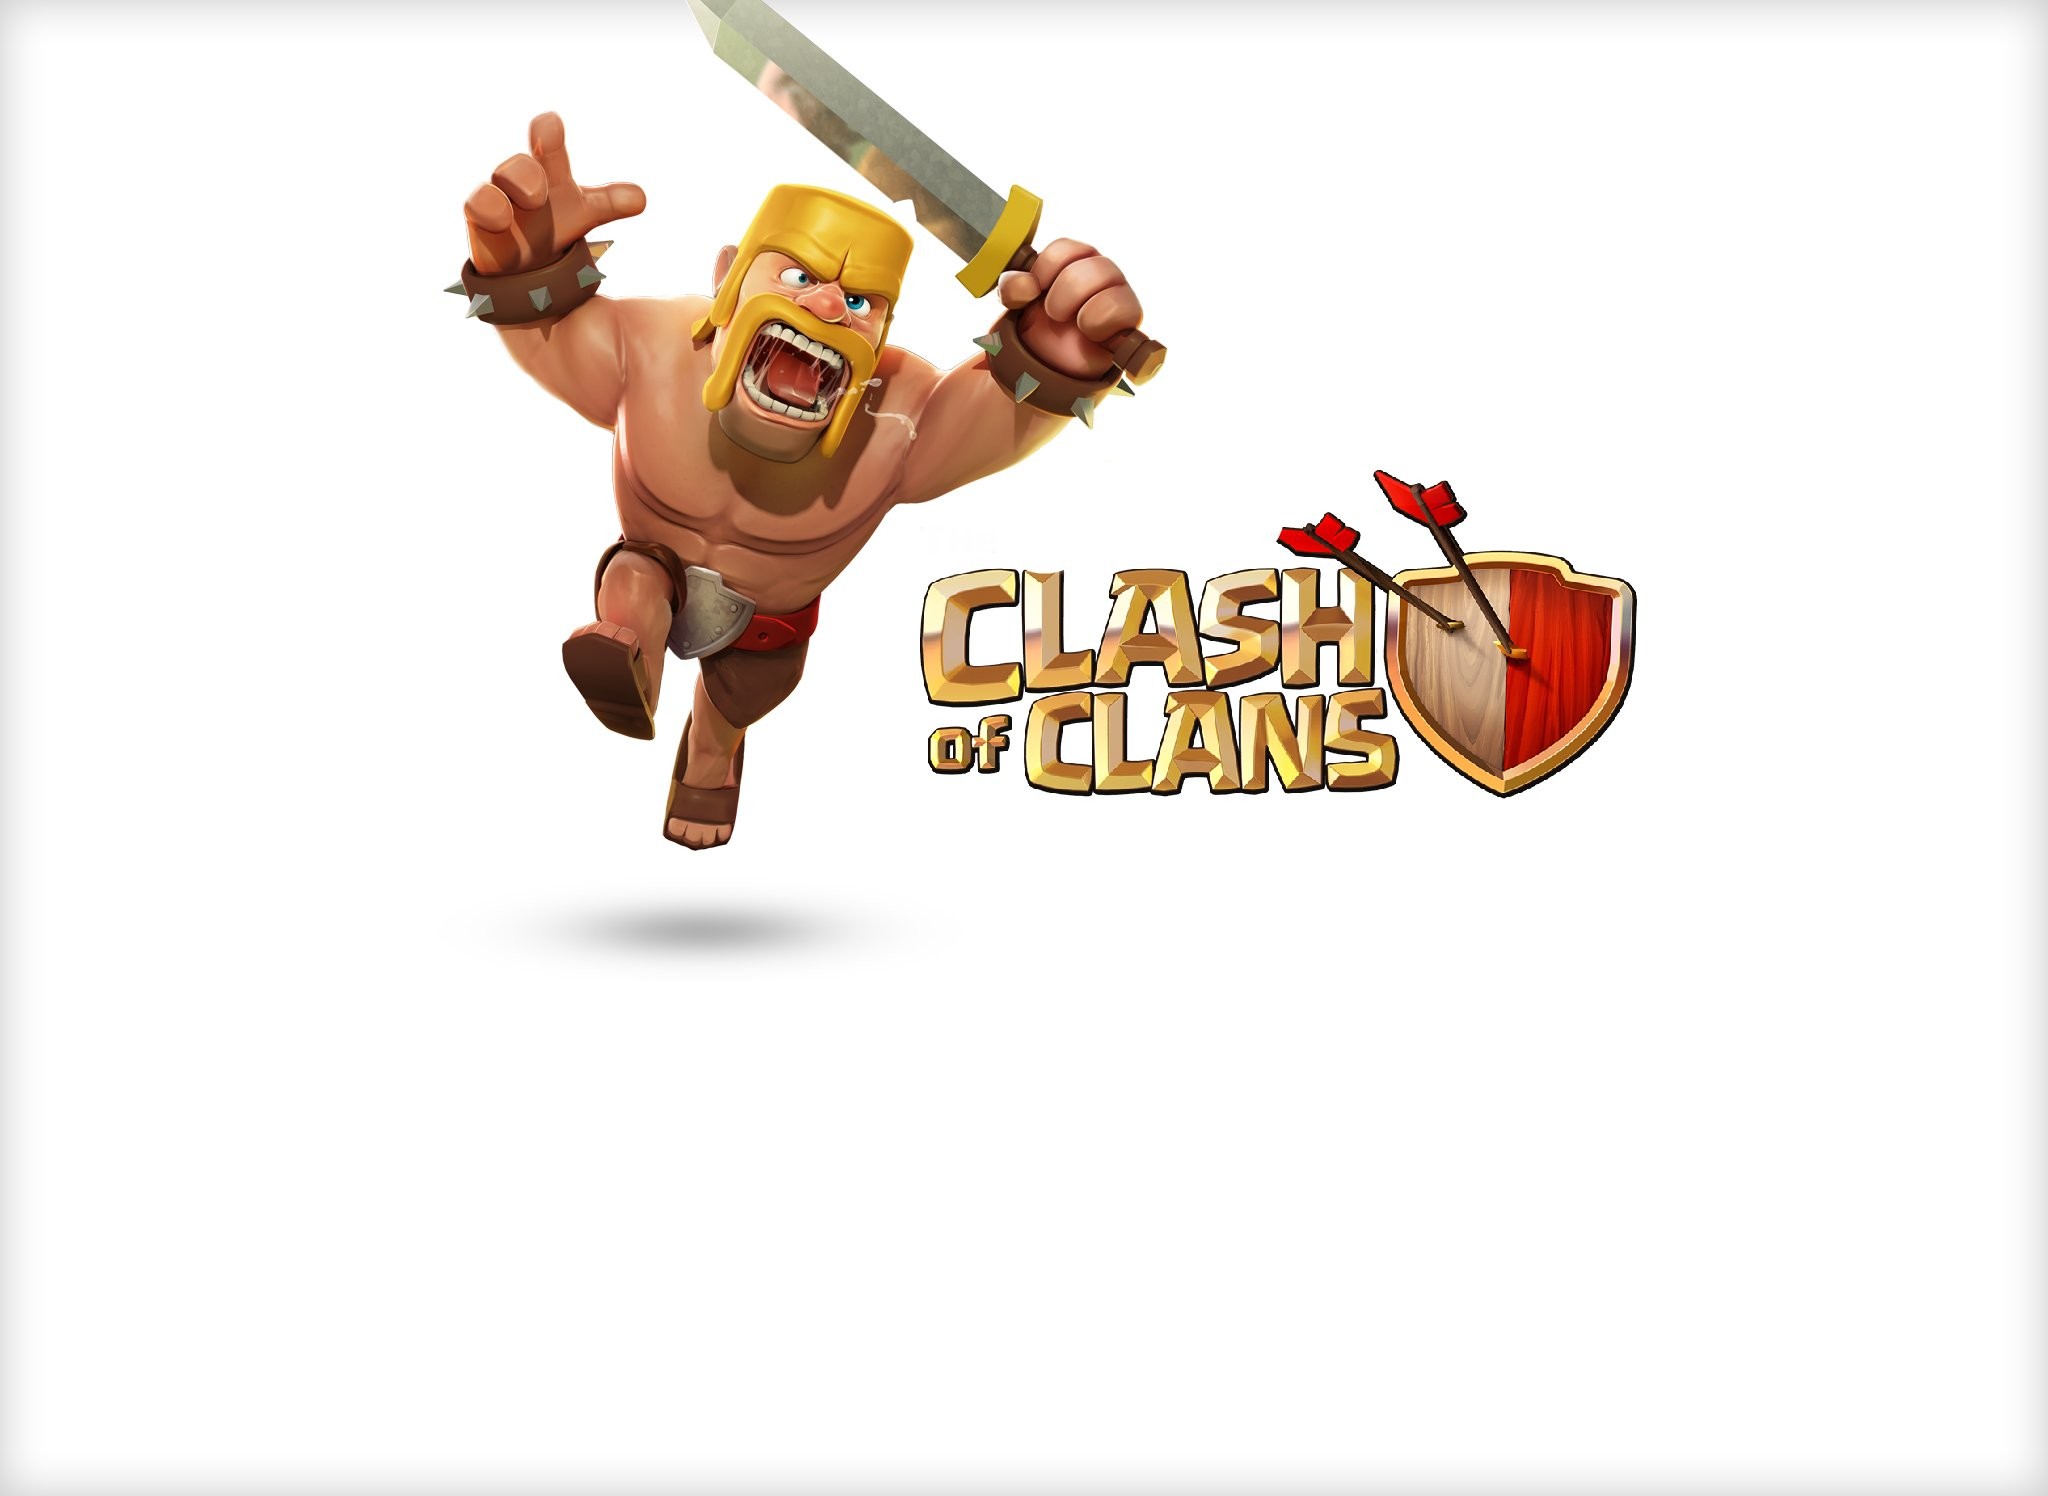 CLASH OF CLANS fantasy fighting family action adventure strategy  1clashclans warrior poster wallpaper | | 580519 | WallpaperUP